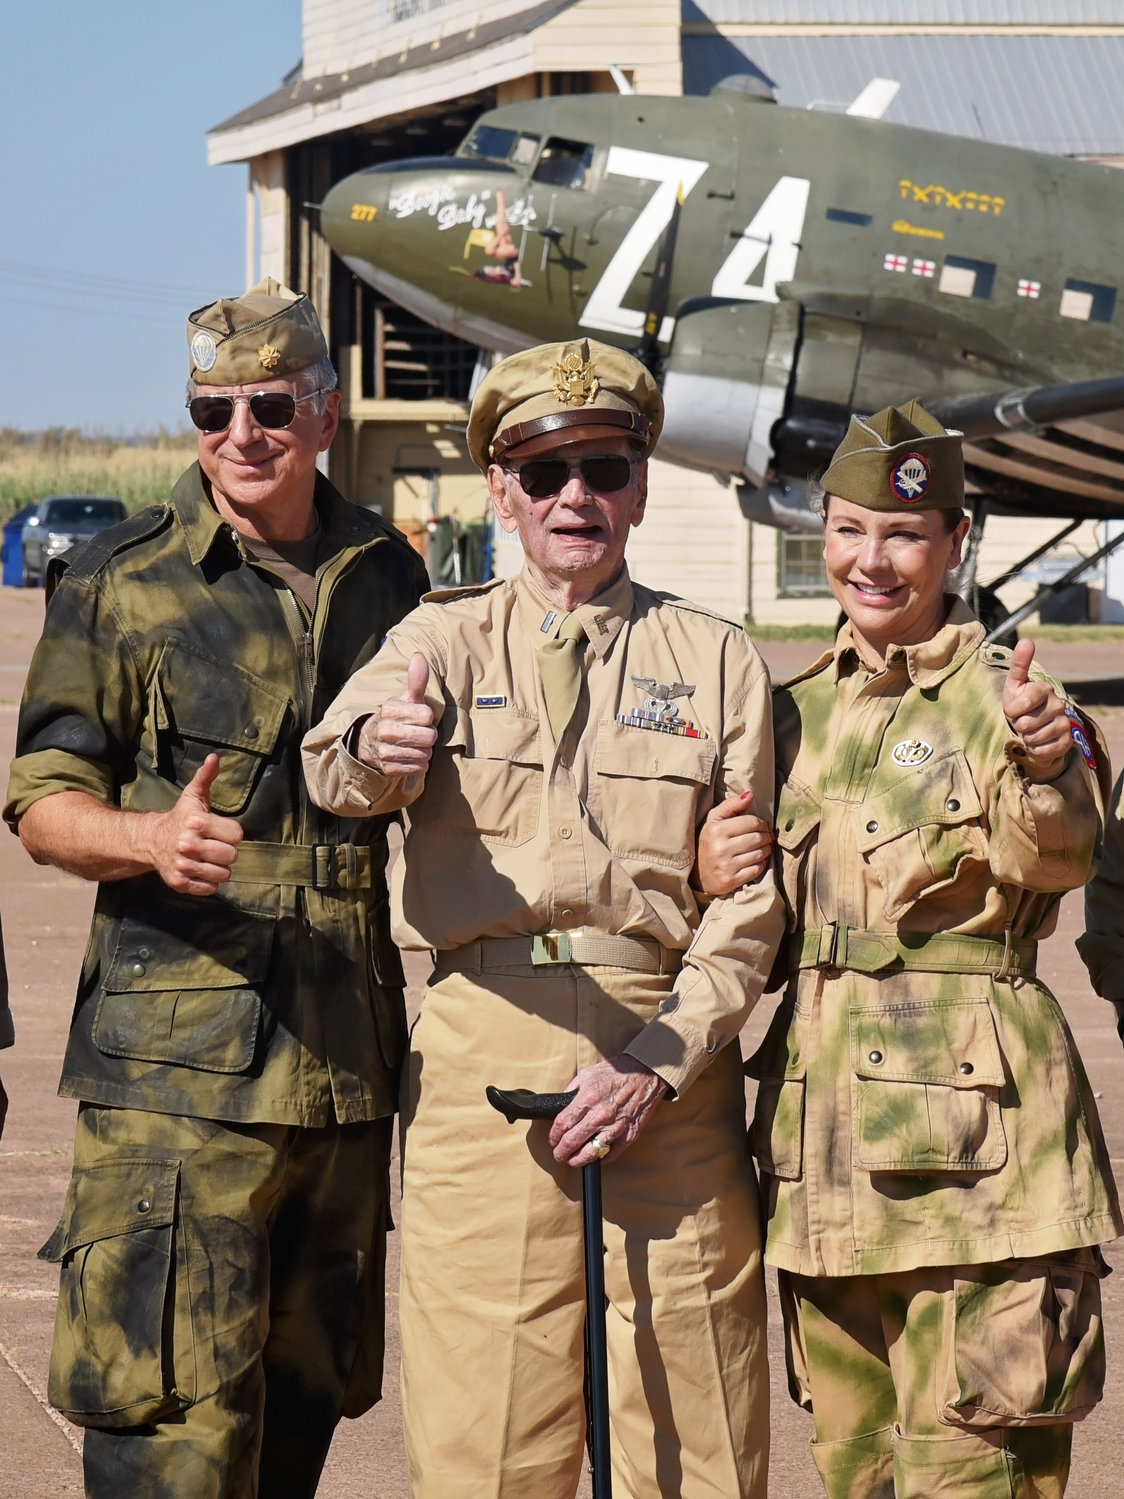 Pictured from left are WWII Airborne Demonstration Team Member Rodney Roycroft, LTC Dave Hamilton (Ret.) and WWII Airborne Demonstration Team Member Kat Healey at Frederick Army Airfield during Summer Jump School 2022.